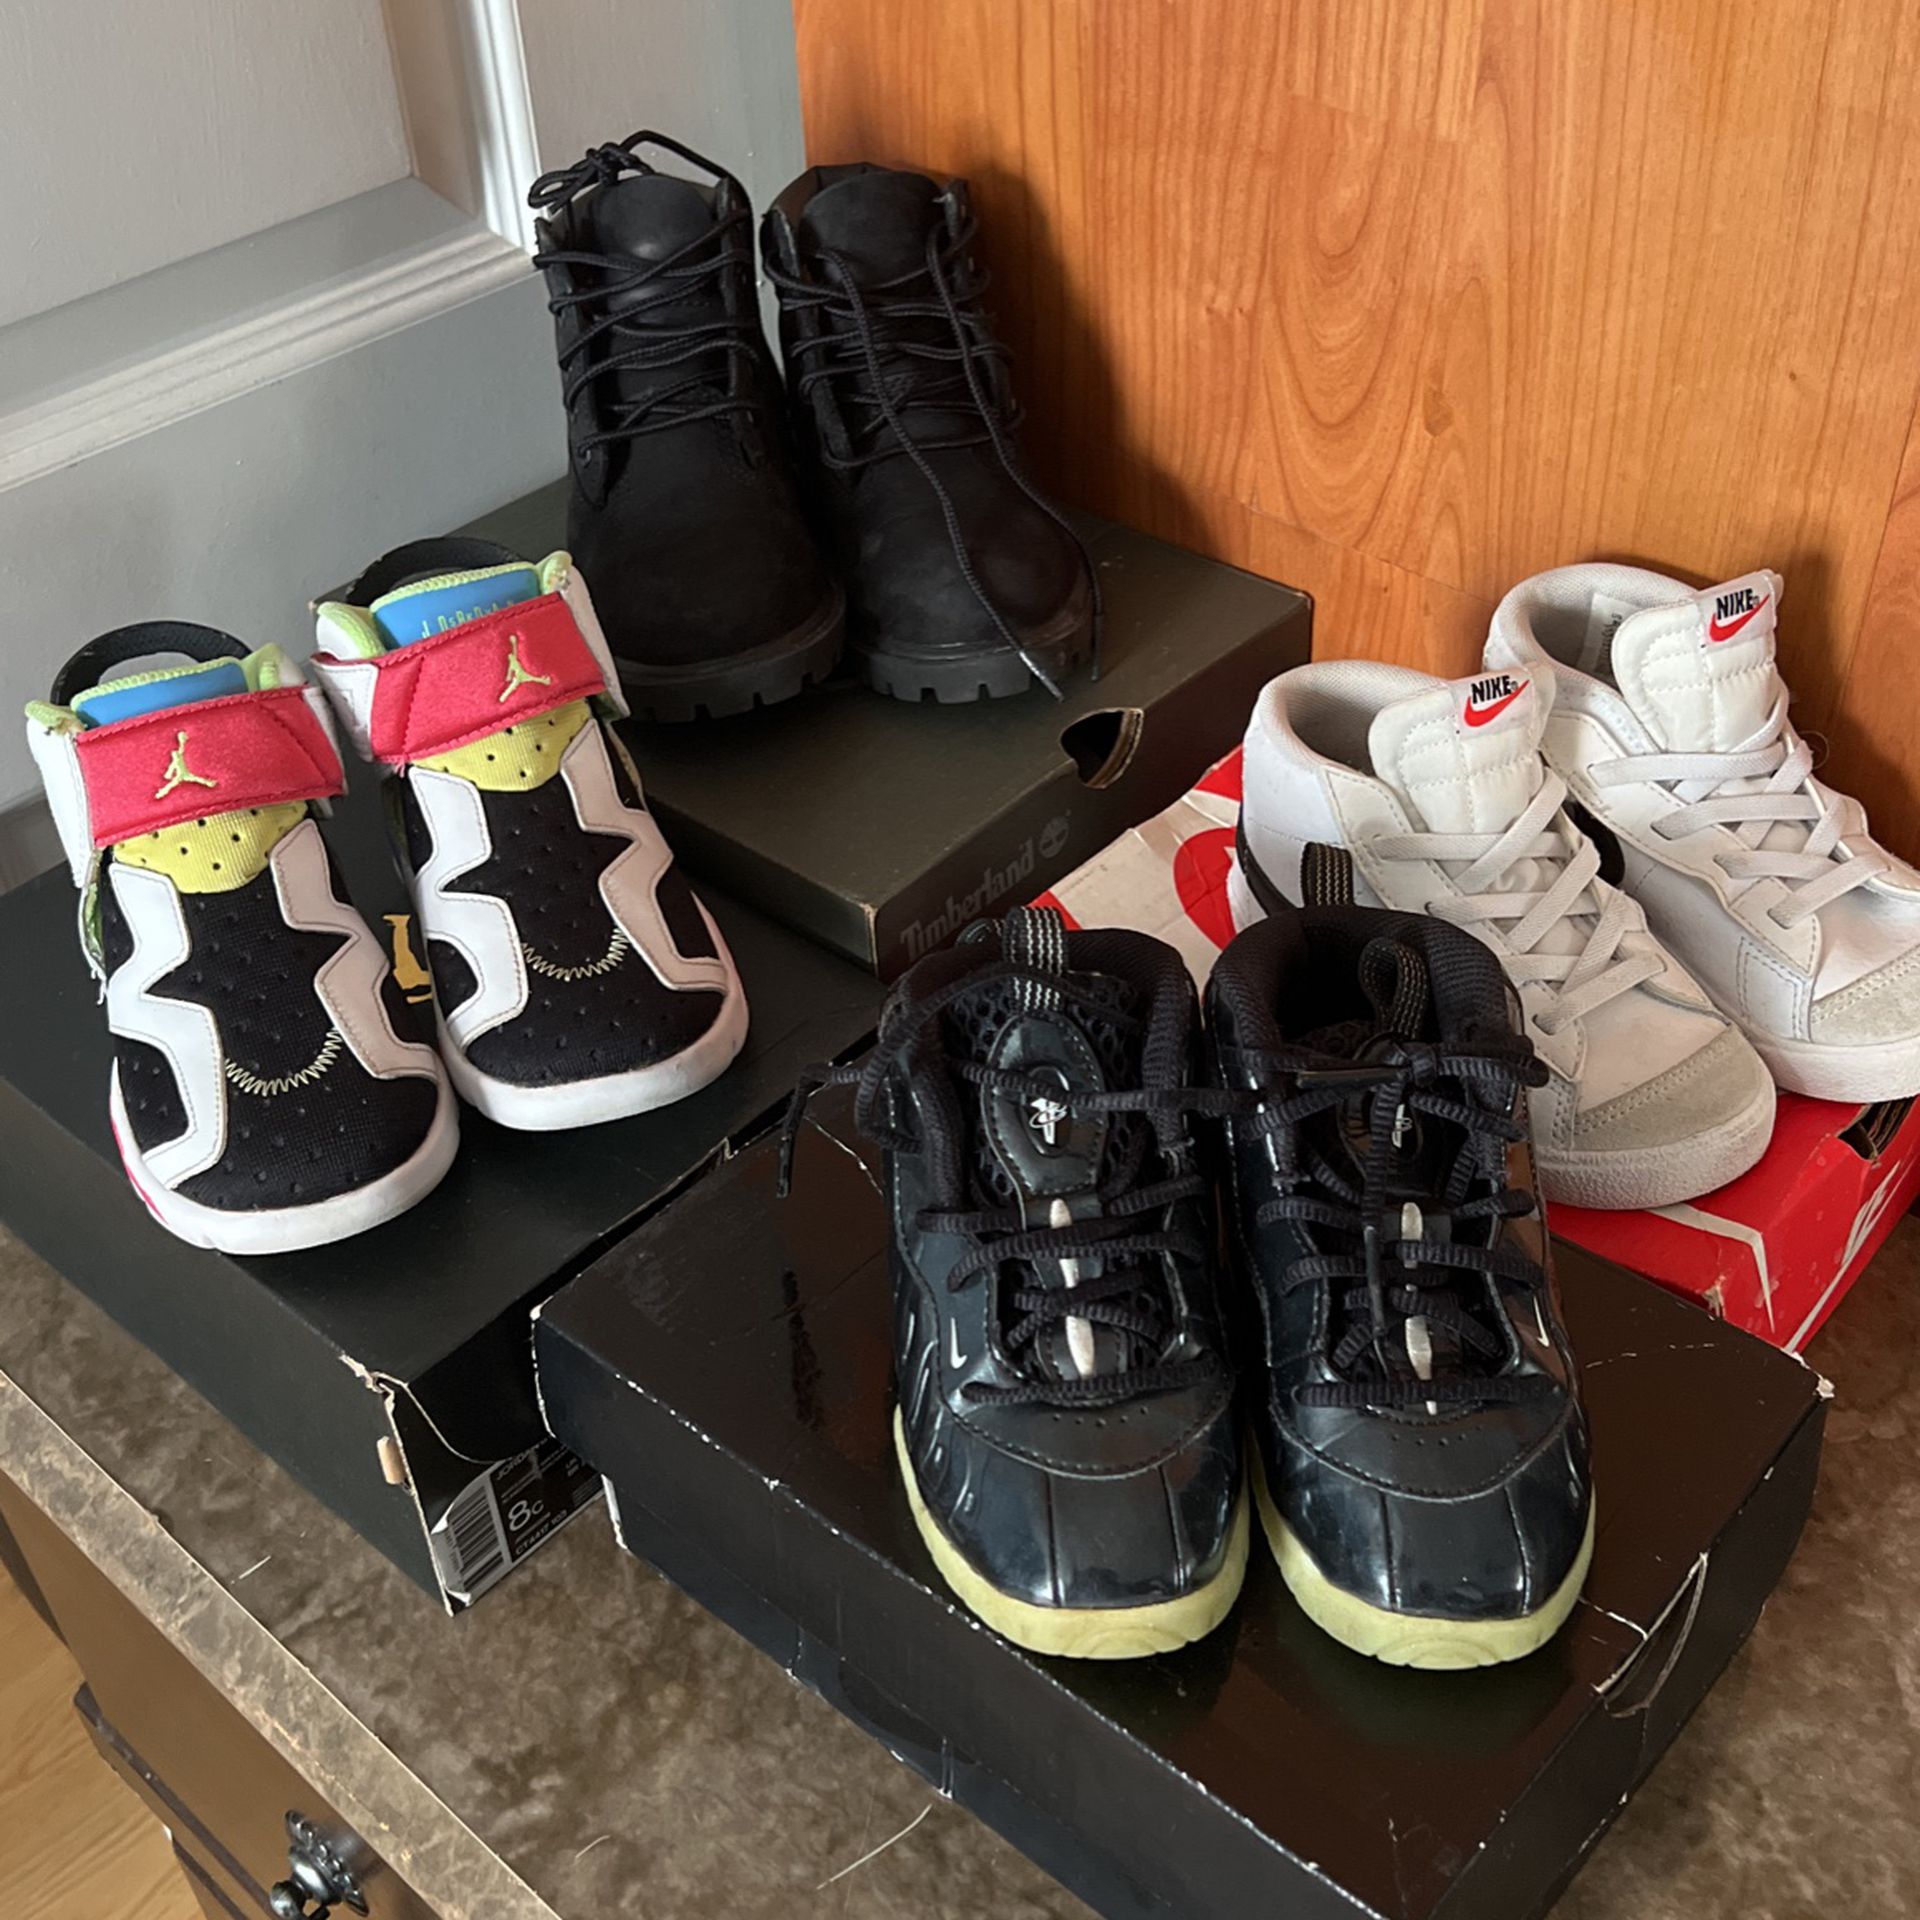 $50 Per Pair Or $200 For All 4.